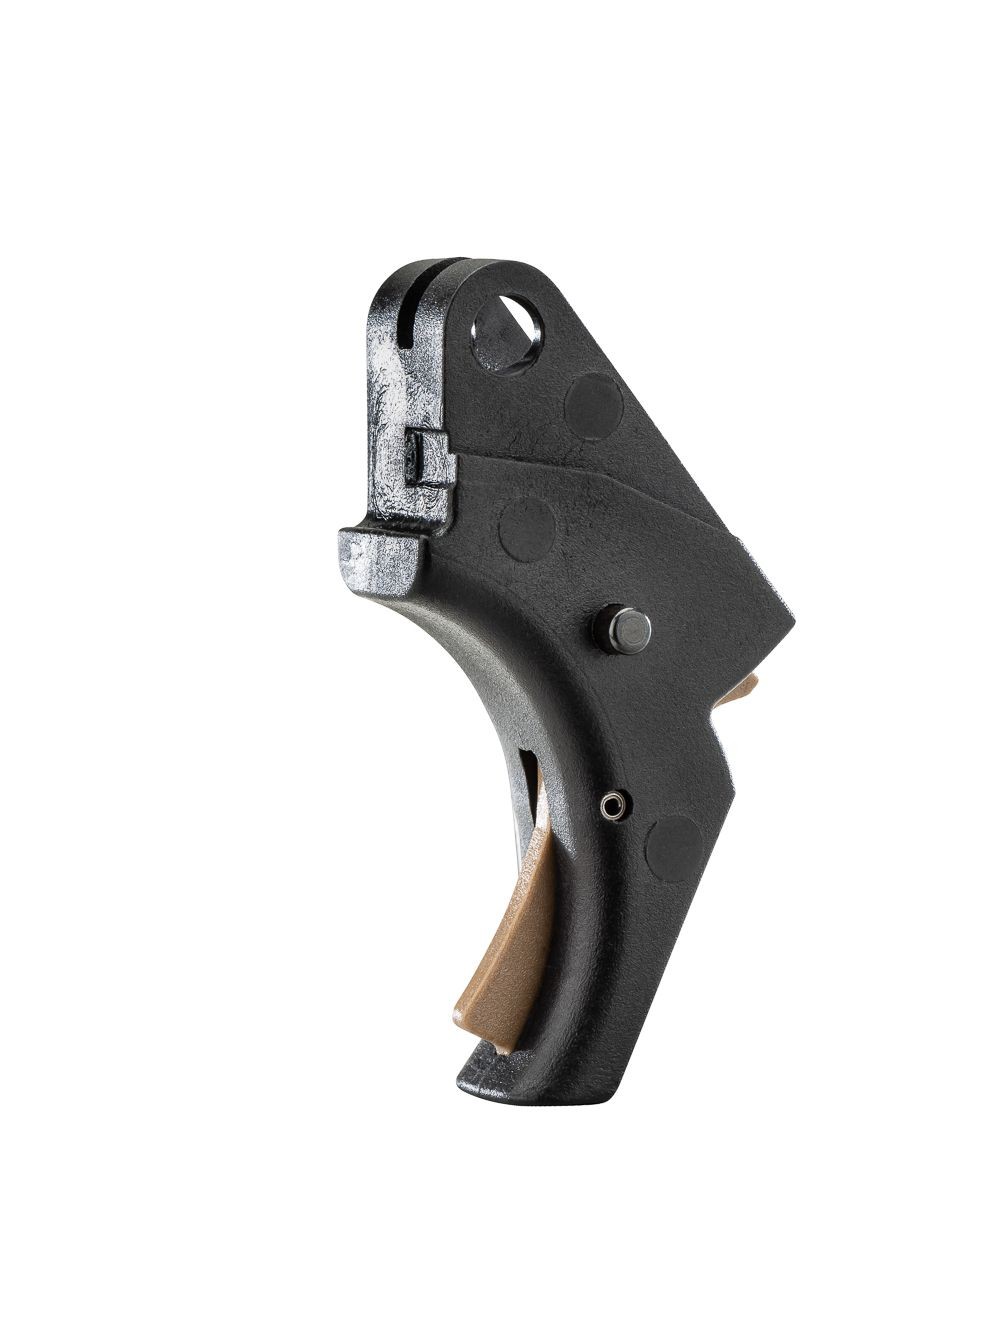 Action Enhancement Poly w/Wide Safety Trigger for M&P (Black)